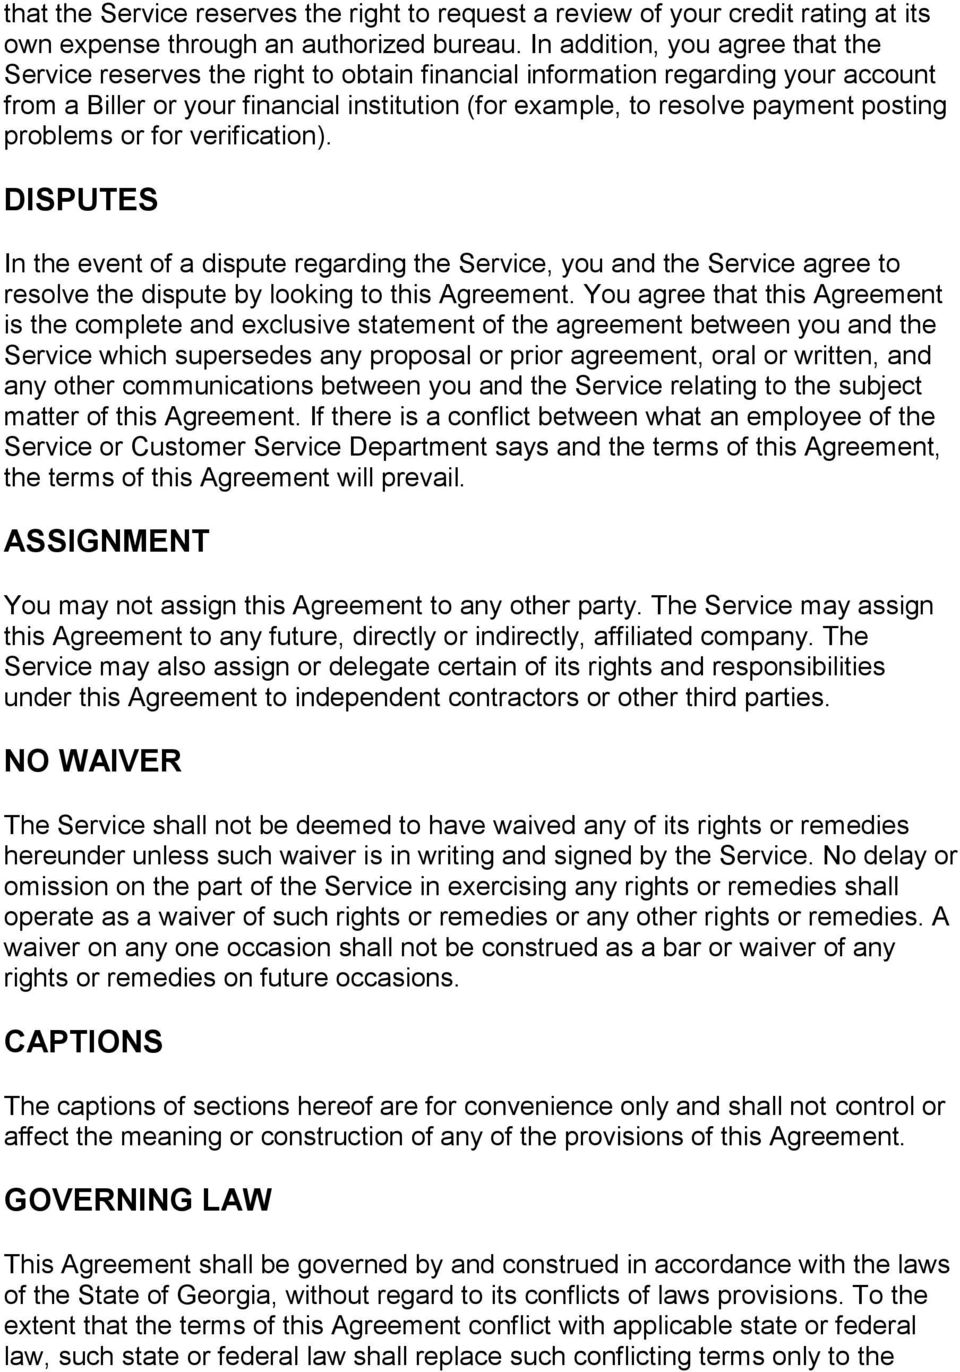 problems or for verification). DISPUTES In the event of a dispute regarding the Service, you and the Service agree to resolve the dispute by looking to this Agreement.